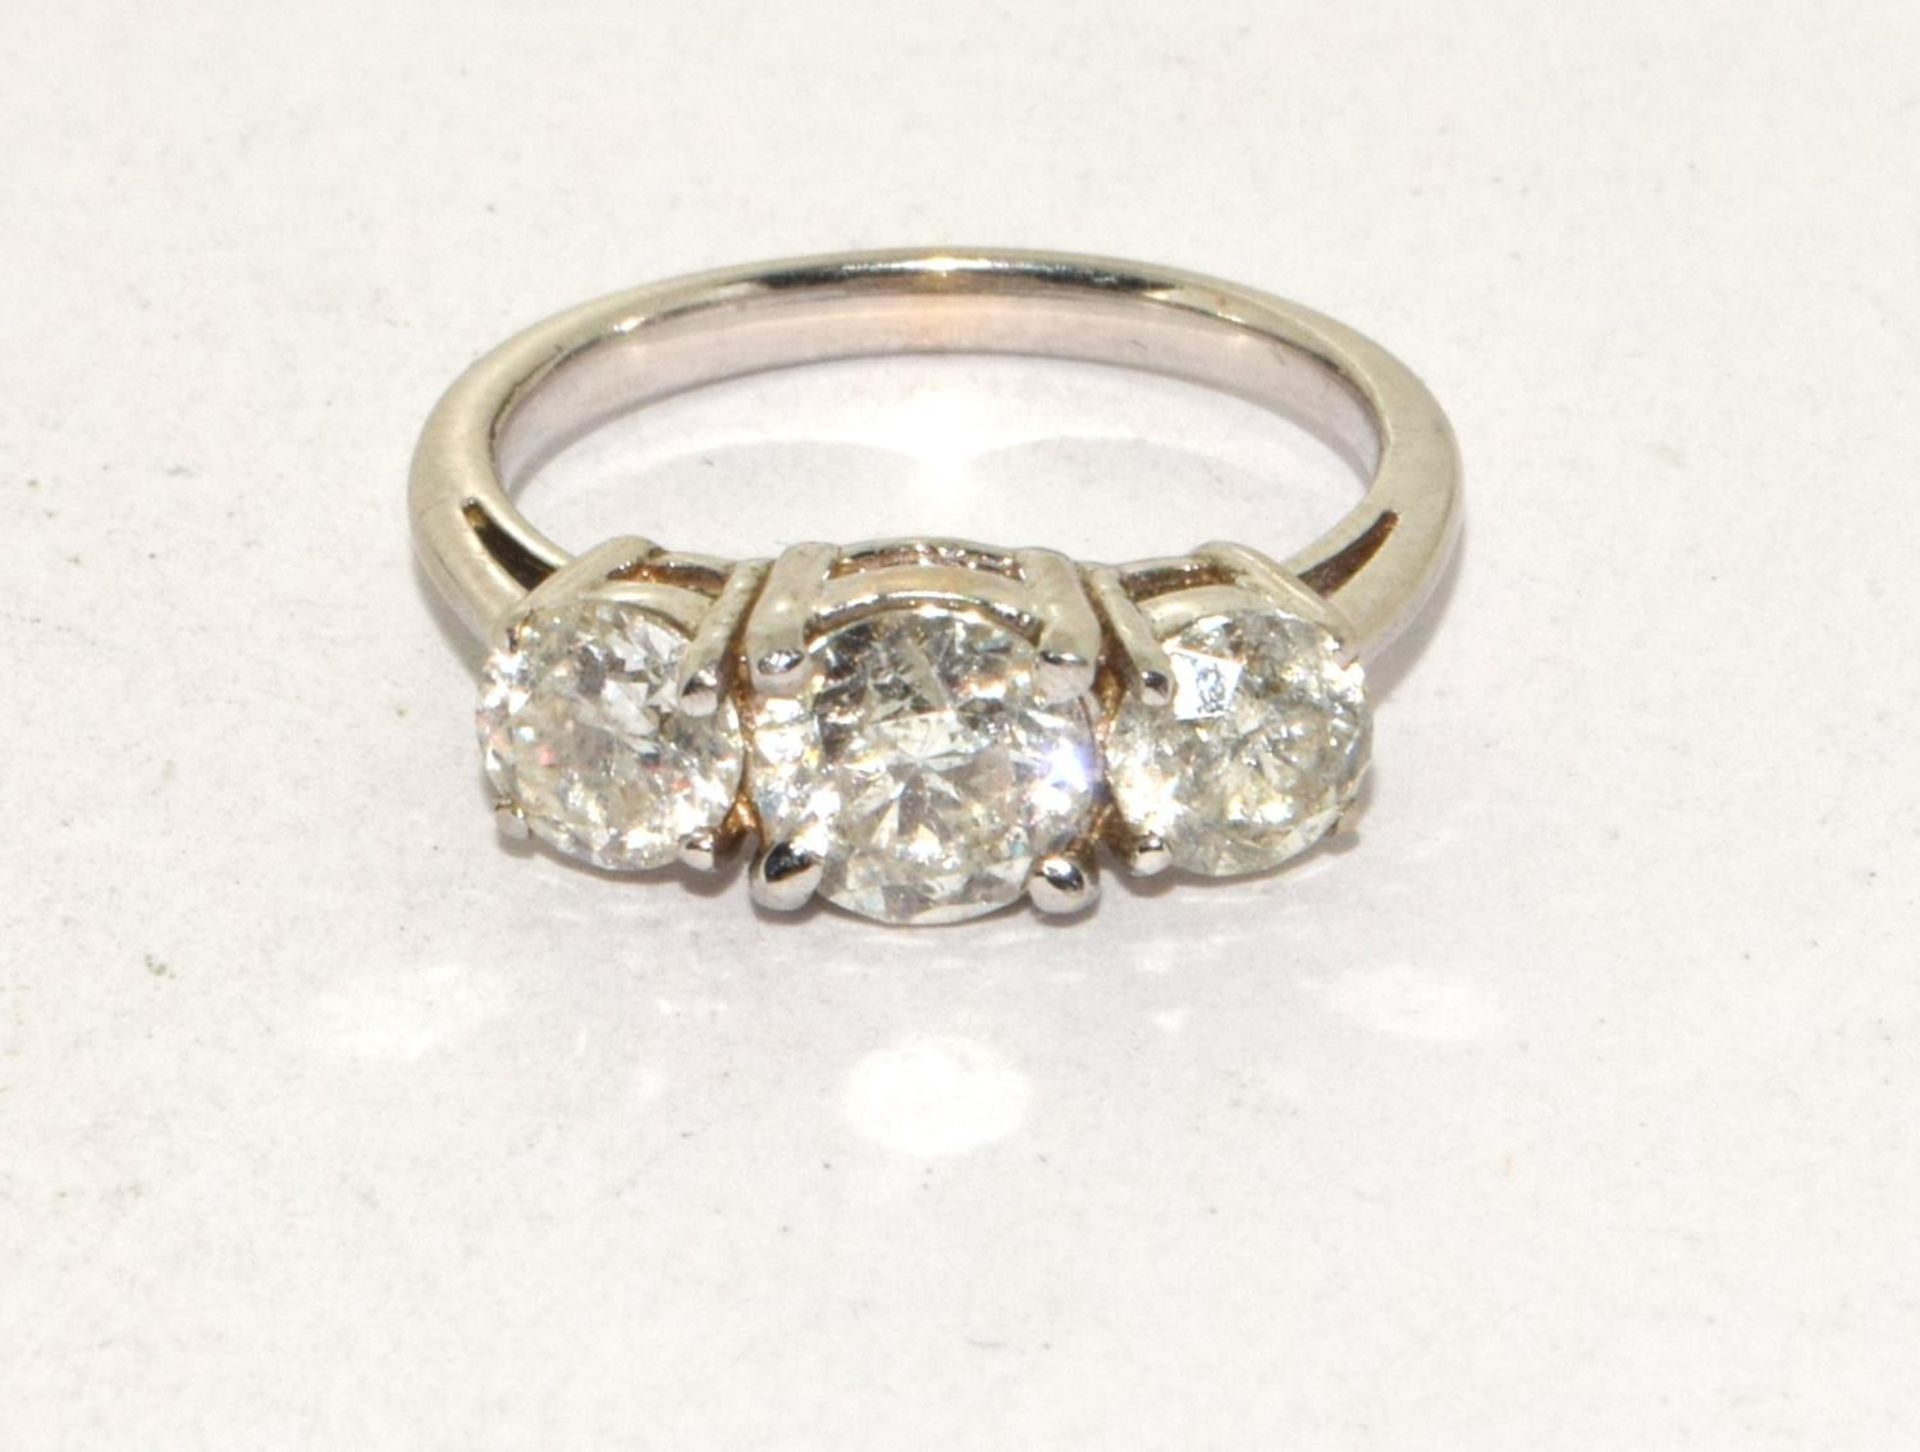 18ct white gold ladies 3 stone trilogy ring approx 2ct diamonds size K - Image 4 of 5